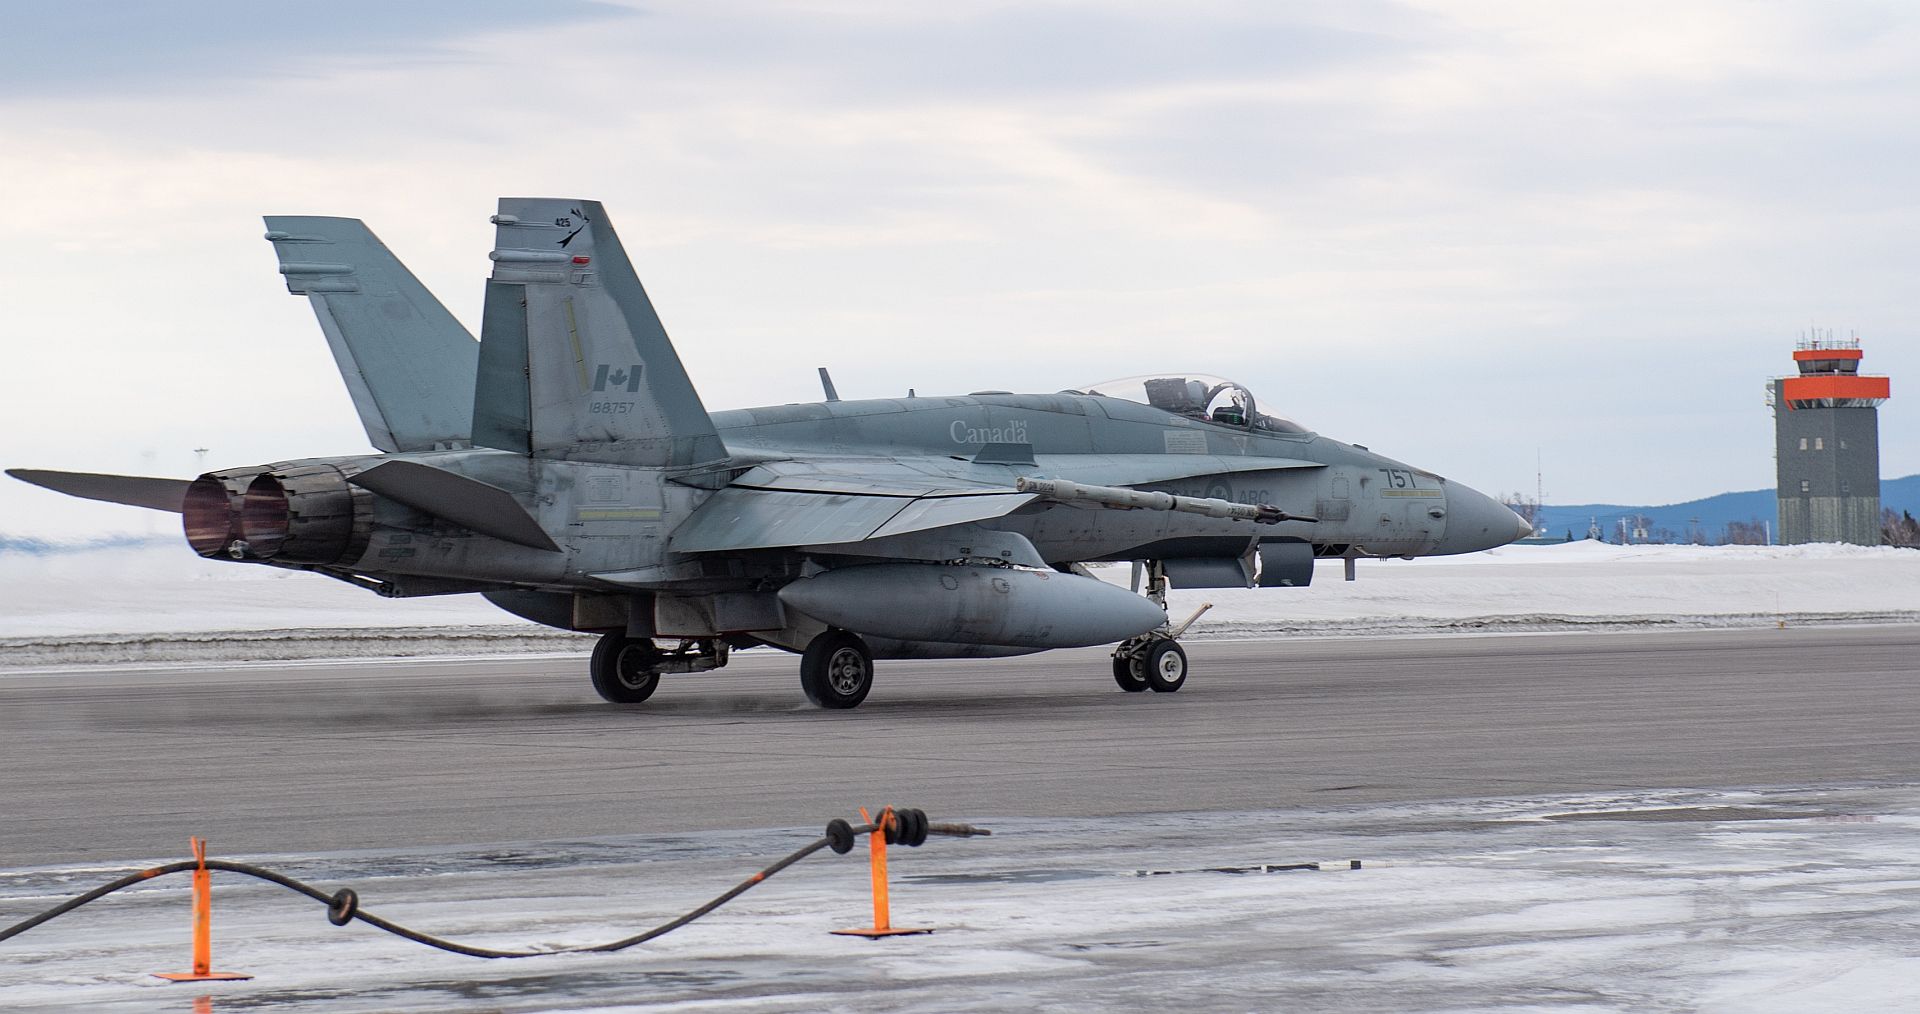 18 Fighter Aircraft Falcon Prepares To Take Off At 5 Wing Goose Bay